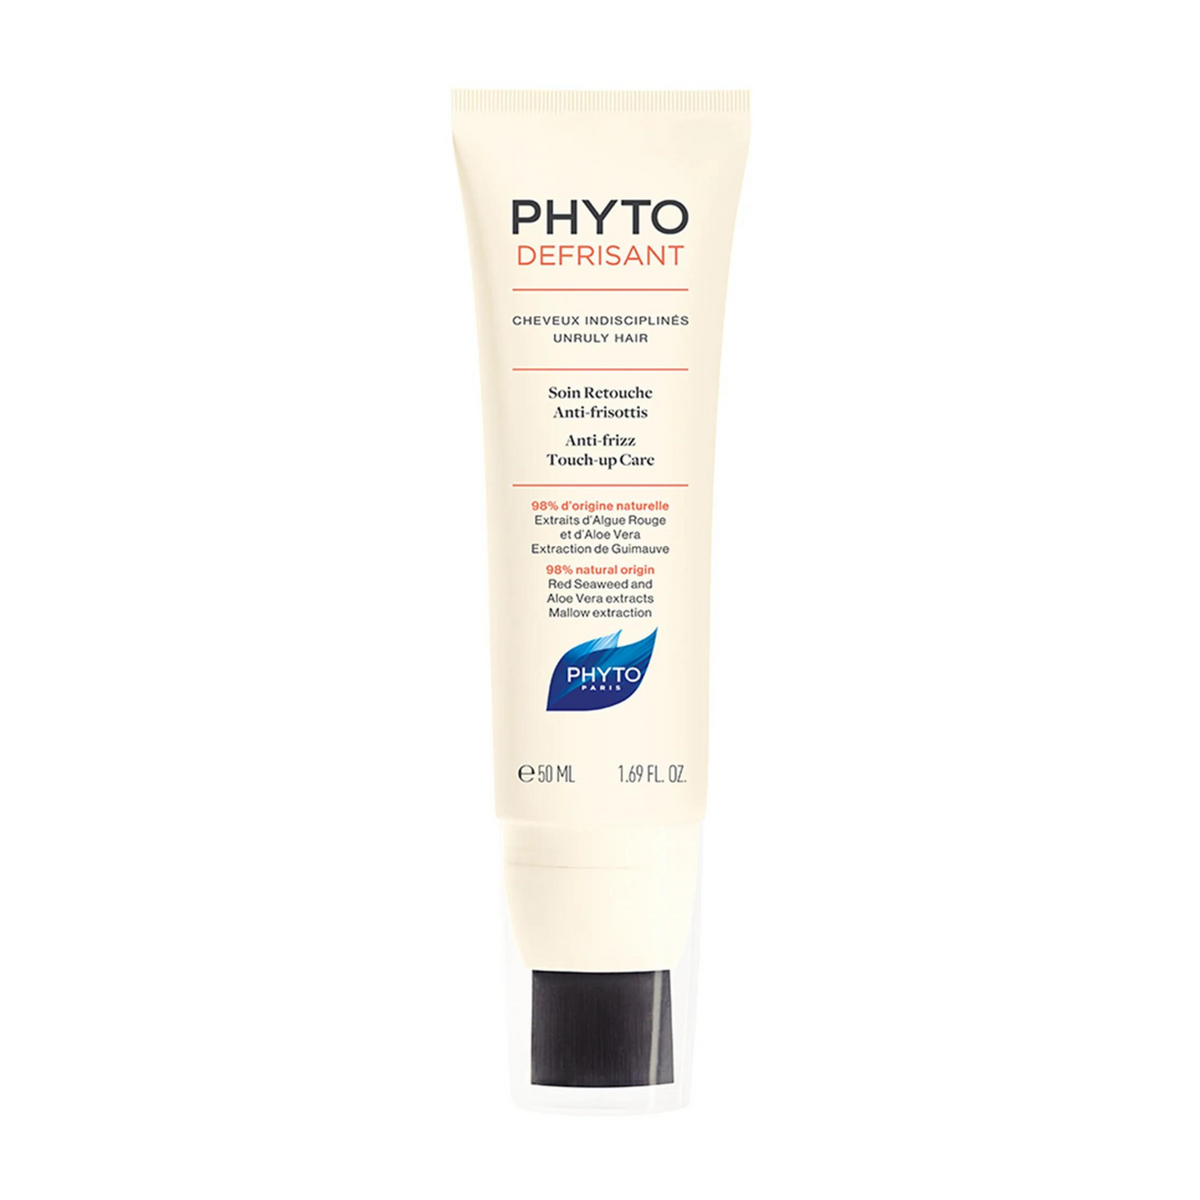 Primary Image of Defrisant Anti-Frizz Touch-up Care (50 ml) 